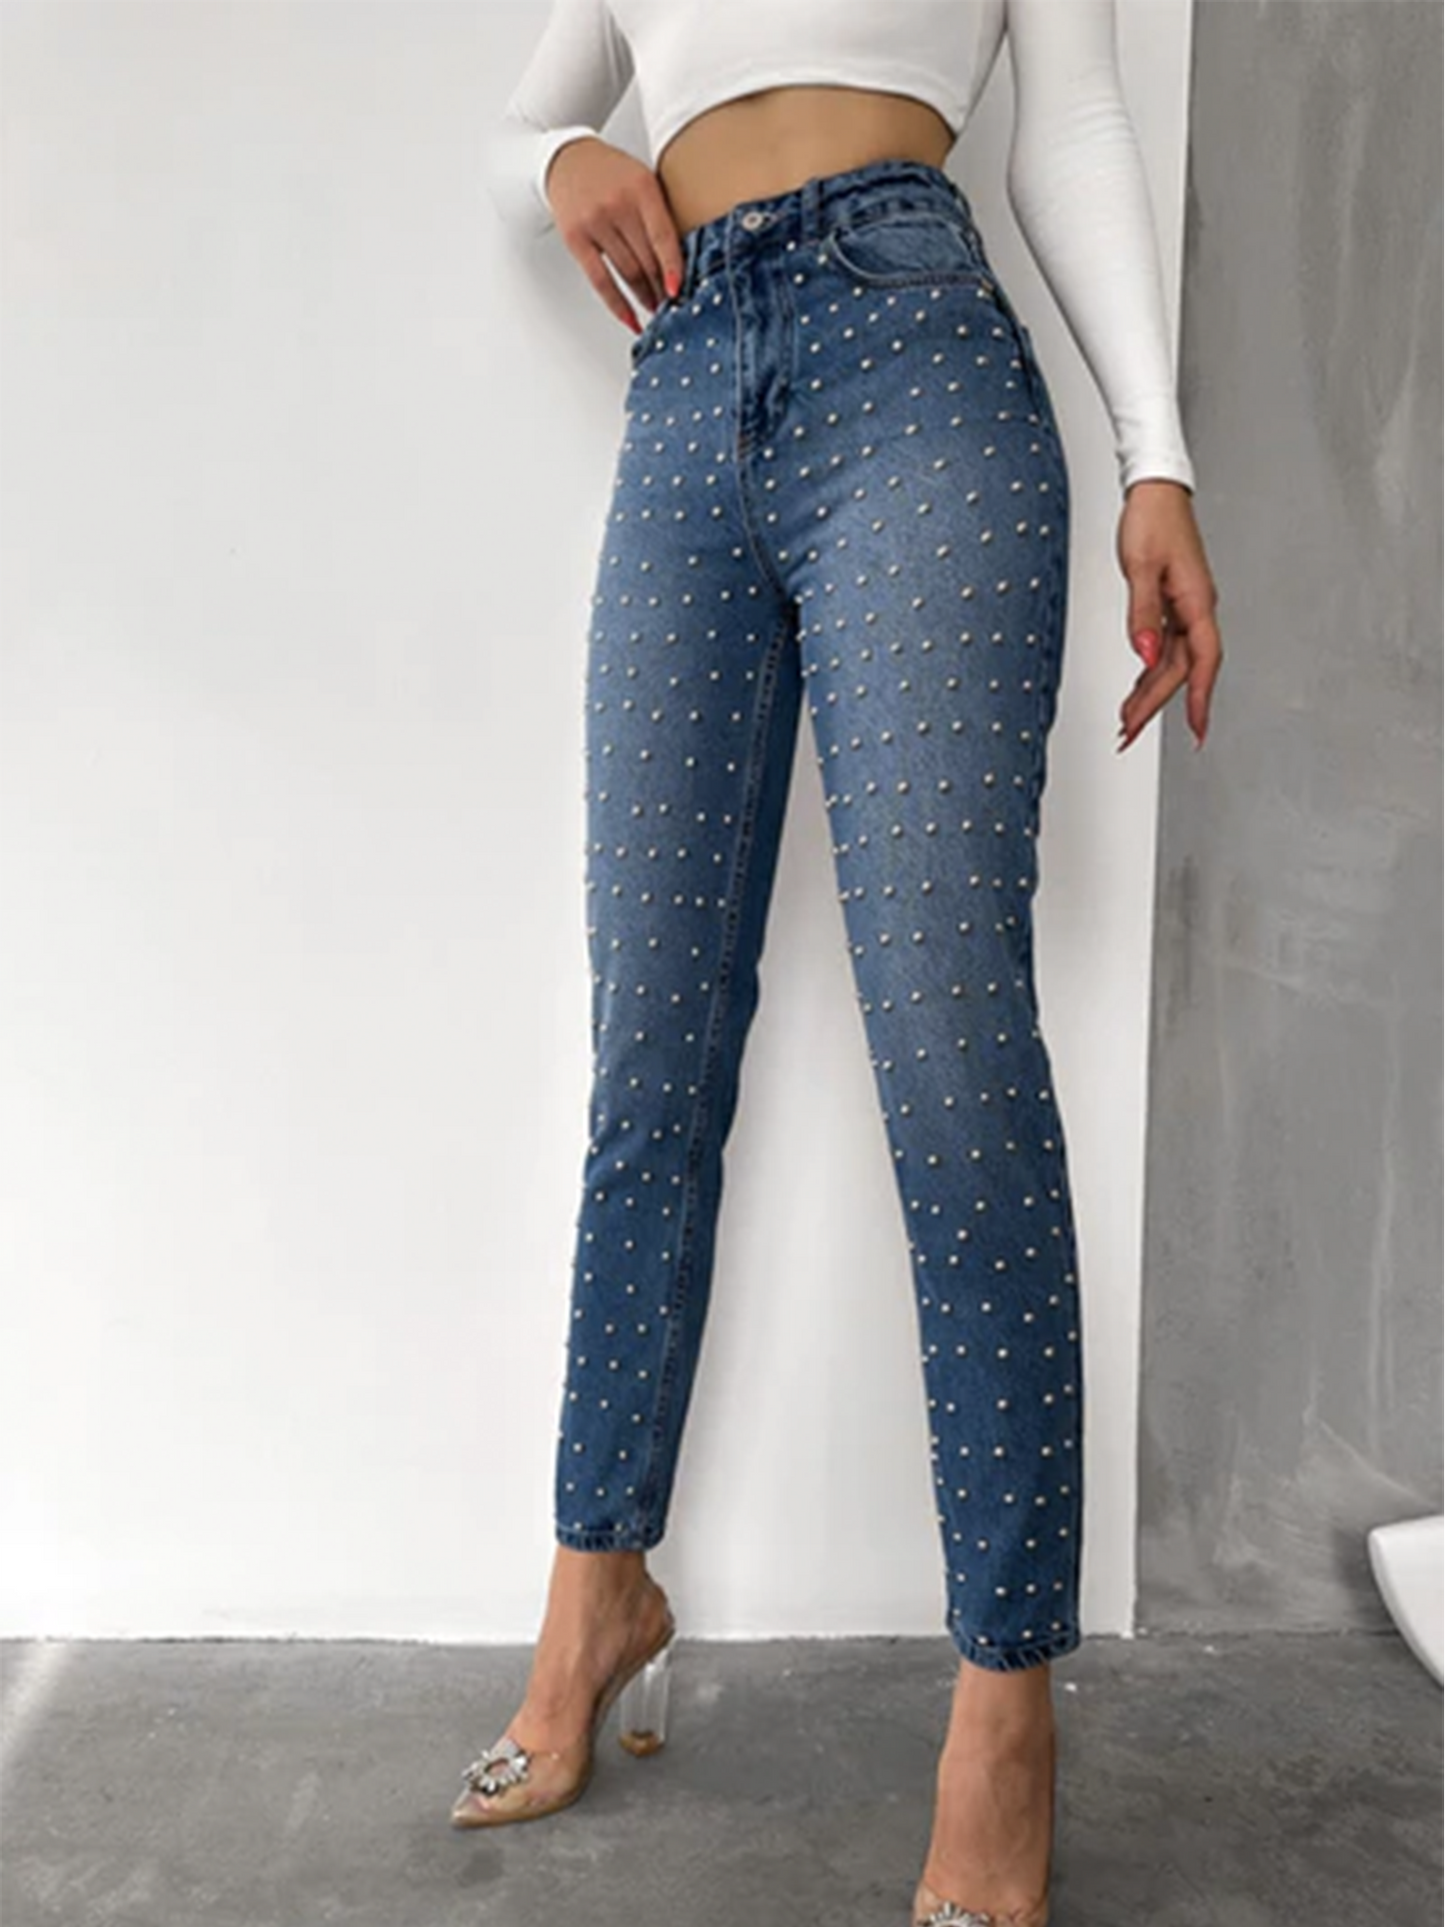 Stylish Beaded Skinny Jeans for a Fashion-Forward Look | Shop Now